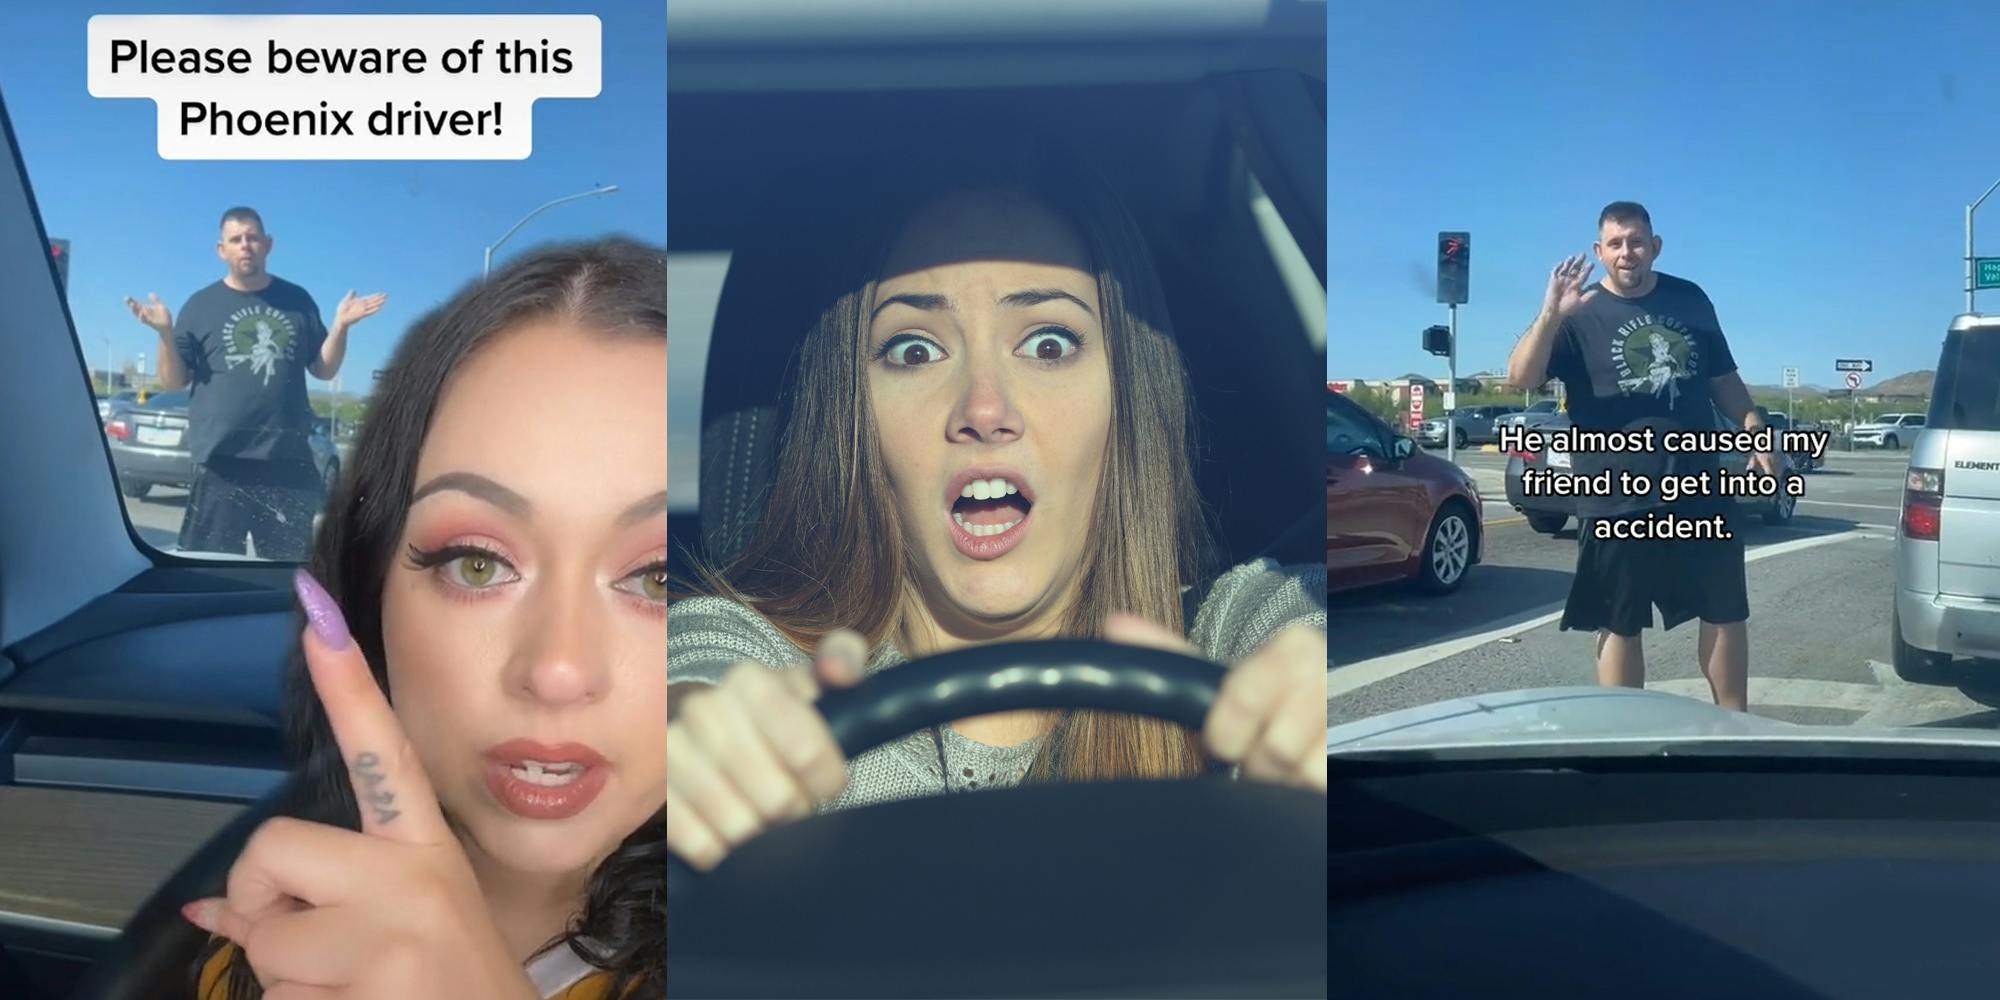 Woman greenscreen TikTok pointing to man in car window putting hands out caption "Please beware of this Phoenix driver!" (l) woman hands on wheel mouth open scared (c) man through car window putting hand up caption "He almost caused my friend to get into a accident." (r)